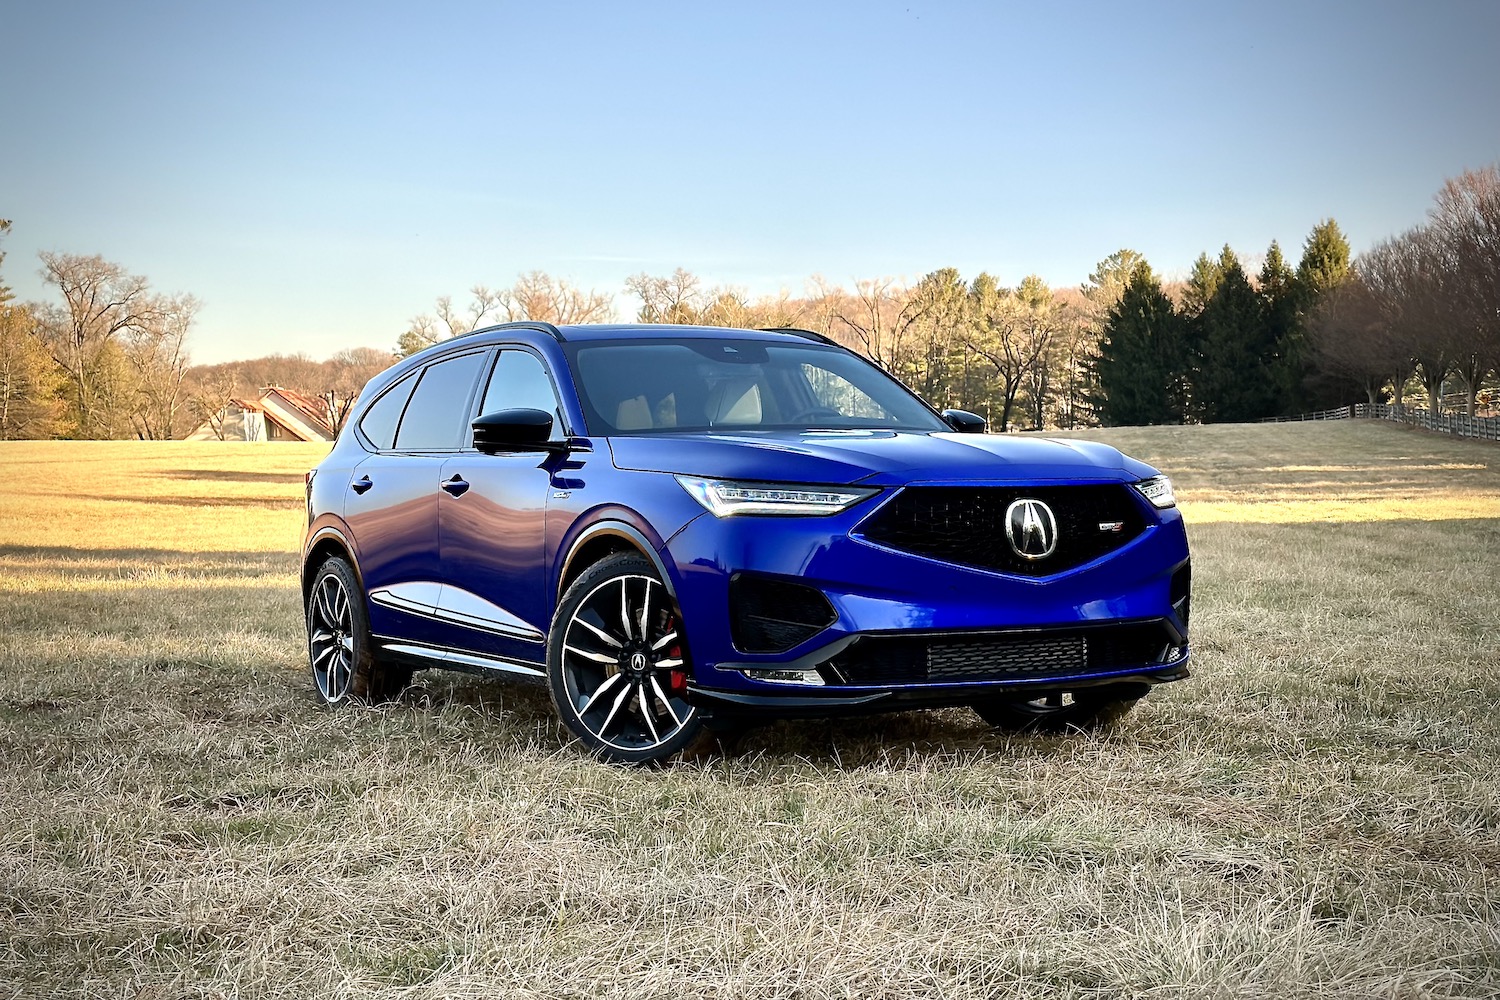 Front end angle of the 2022 Acura MDX Type S from the passenger's side in a hay field.